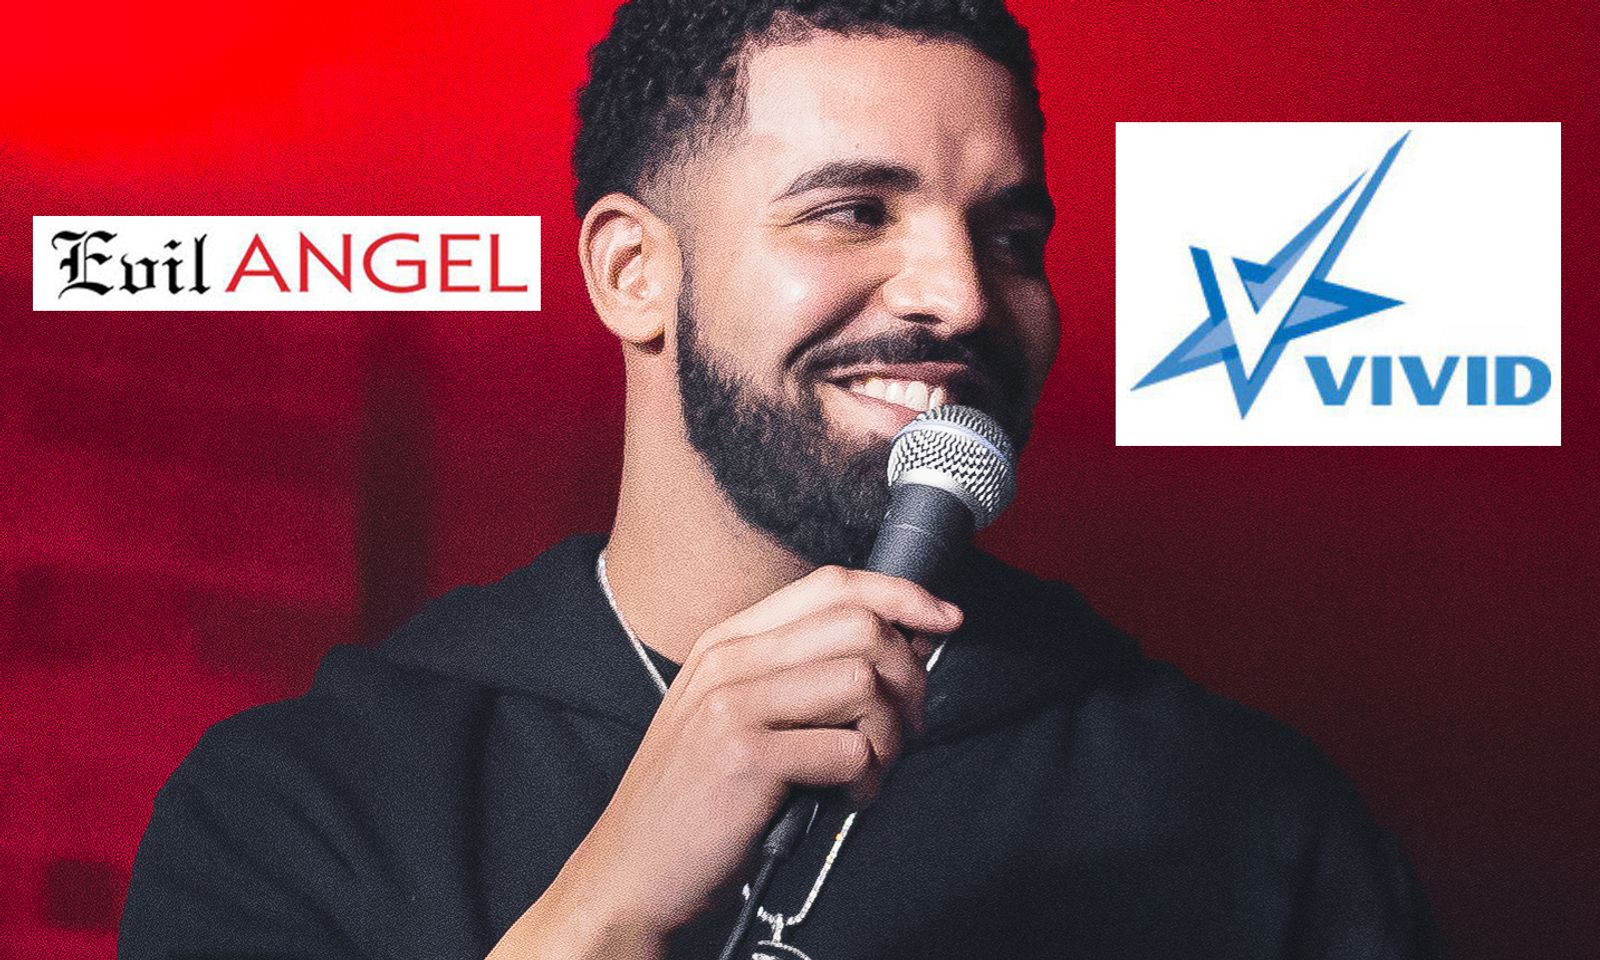 Drake Shouts Out Evil Angel, Vivid in New Track 'Final Fantasy'